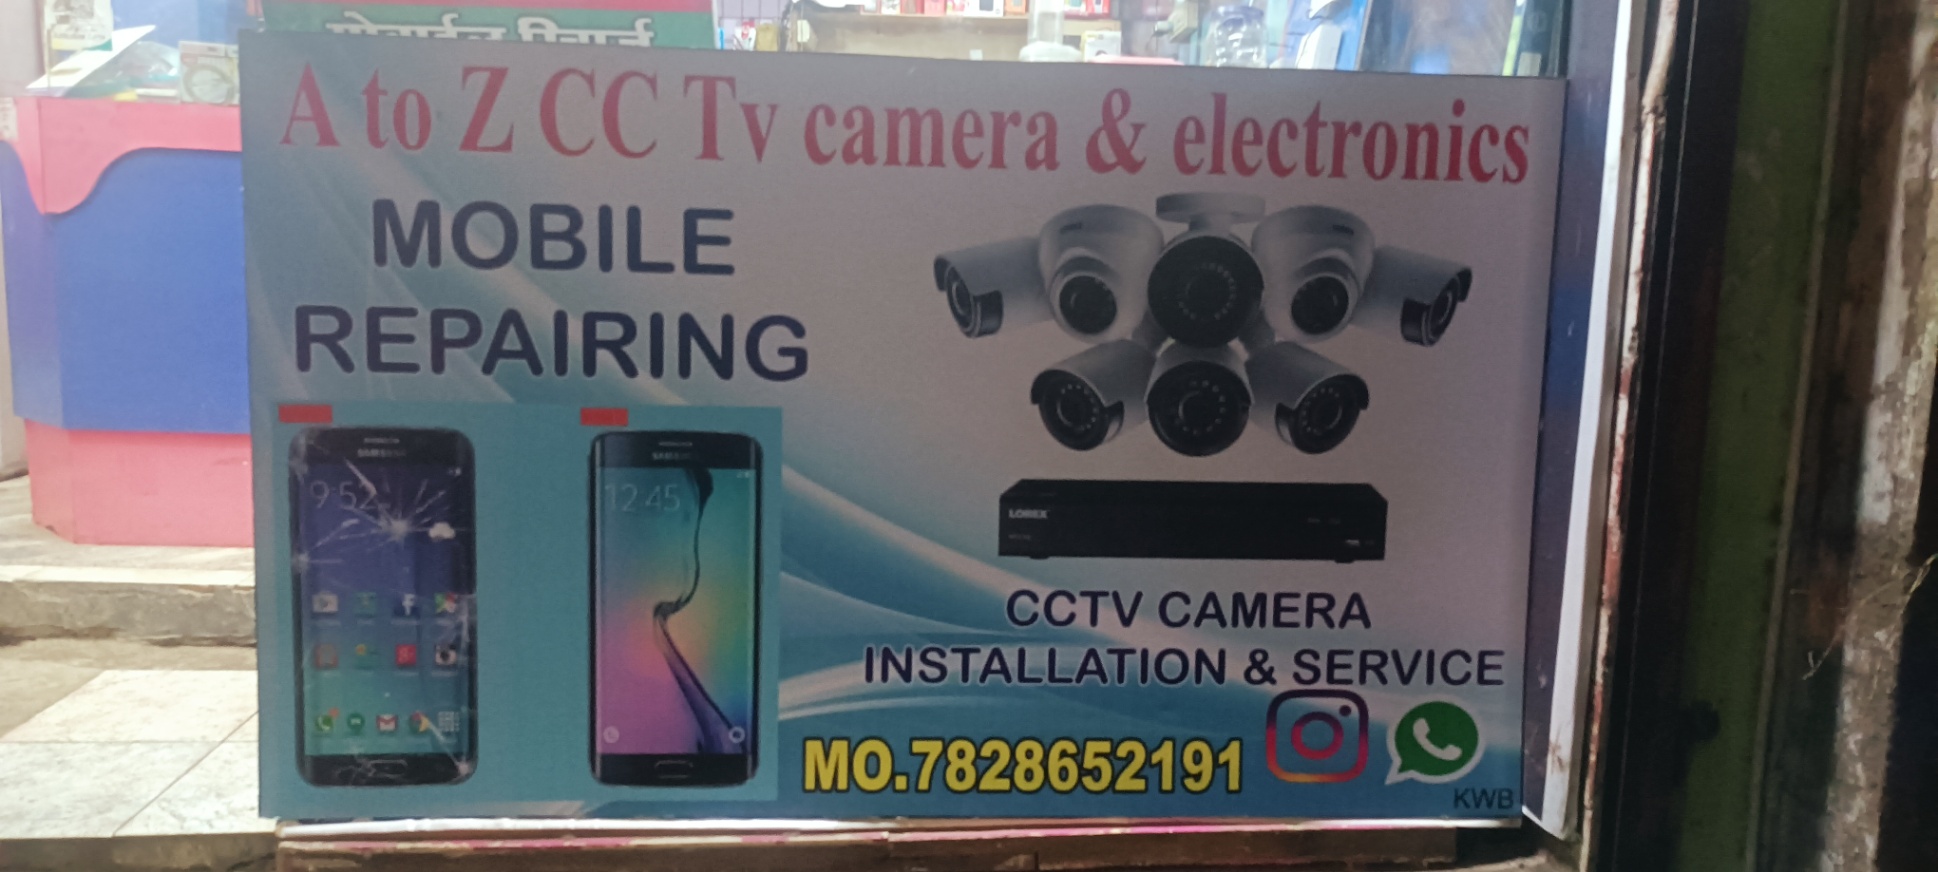 A to z cc tv camera and installation 